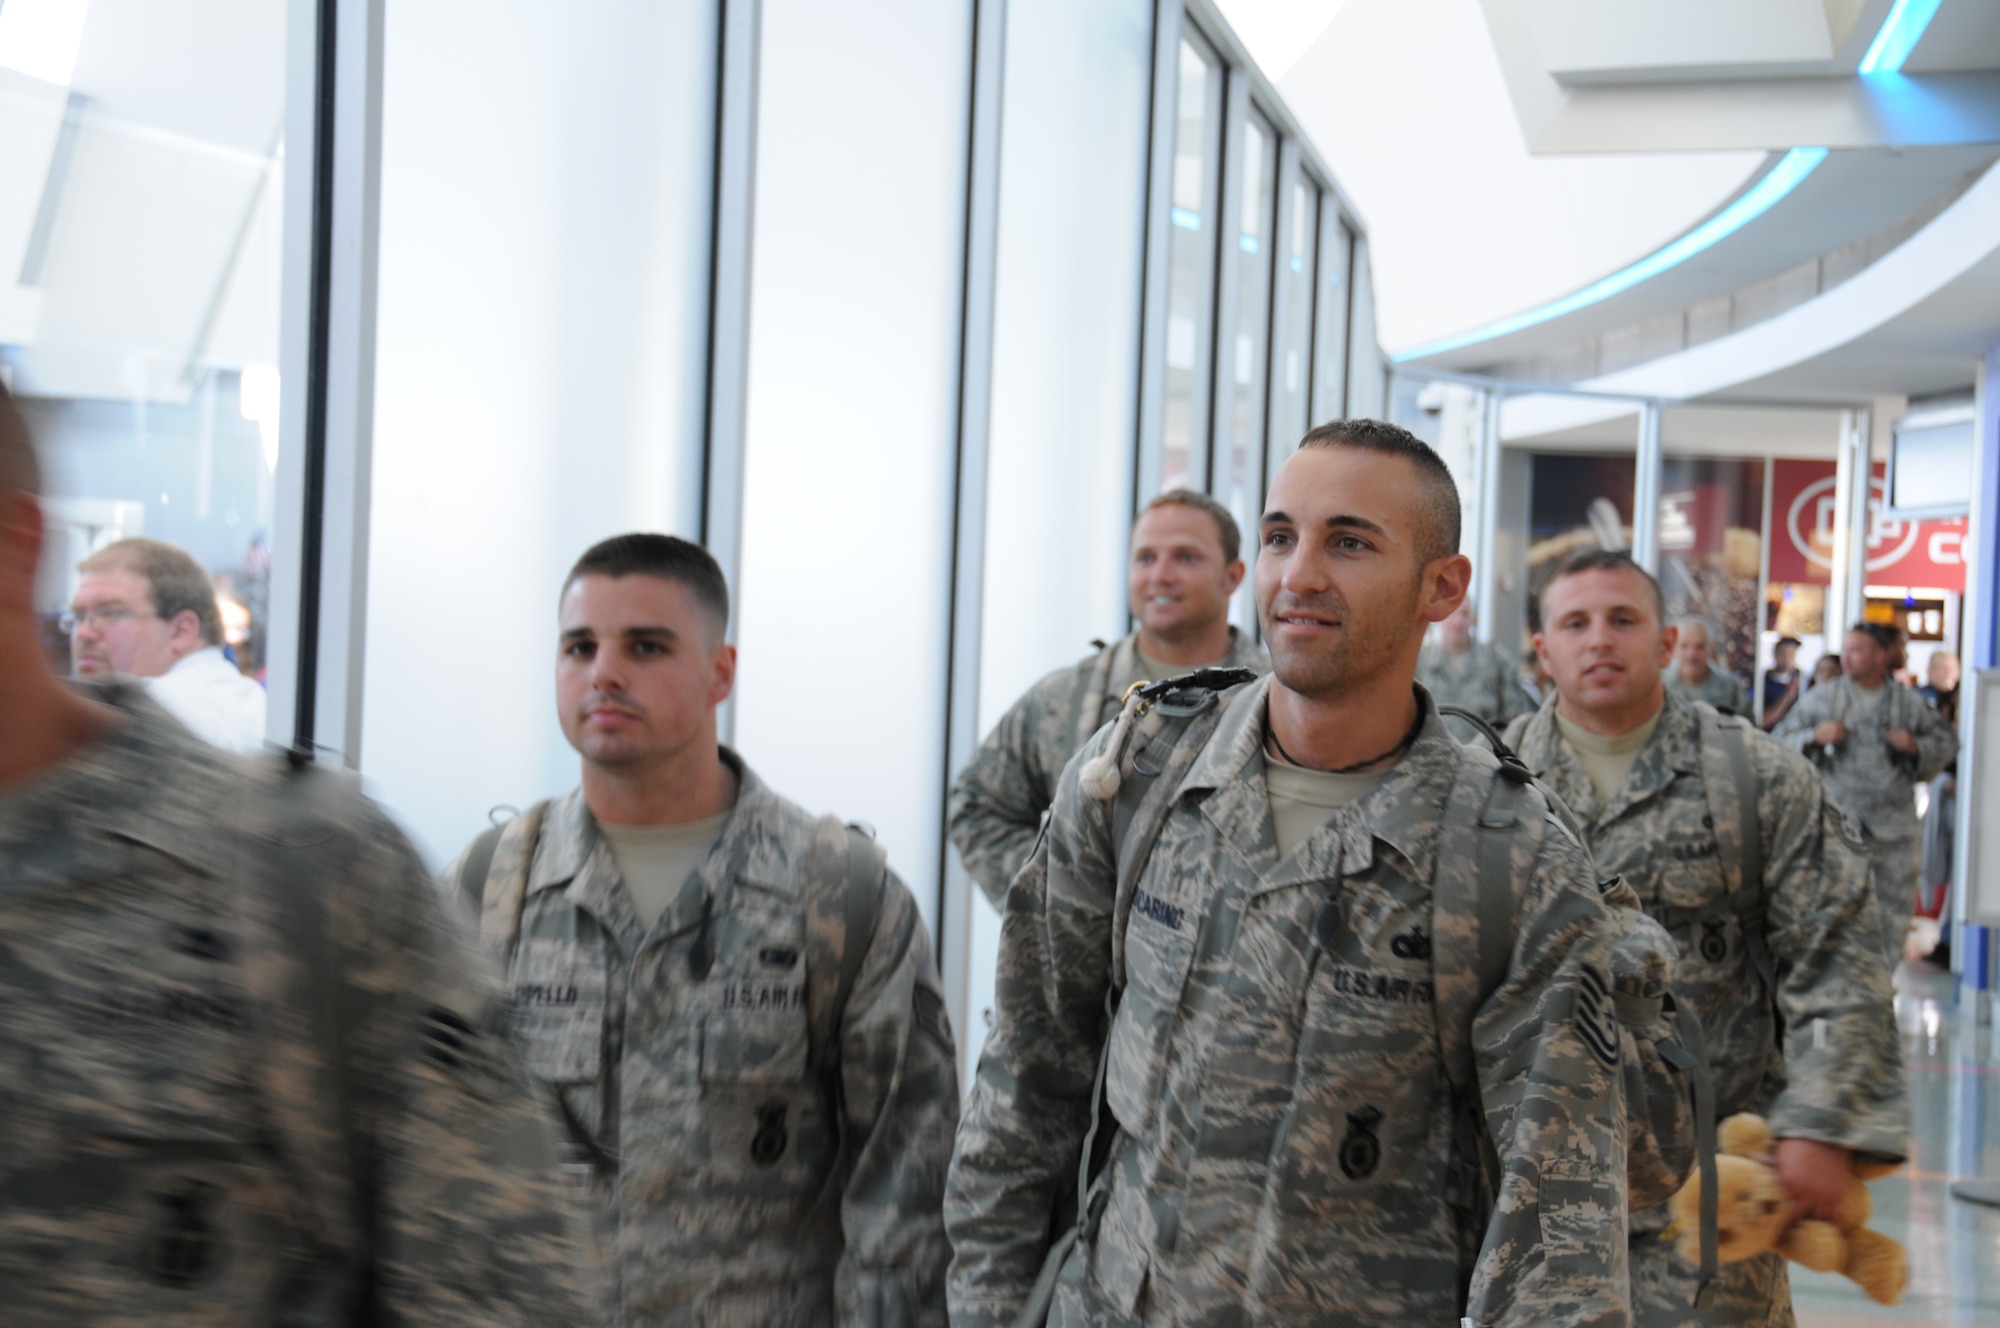 Security forces new mission, to reunite with their families. (U.S. Air Force photo/Senior Airman Peter Dean)